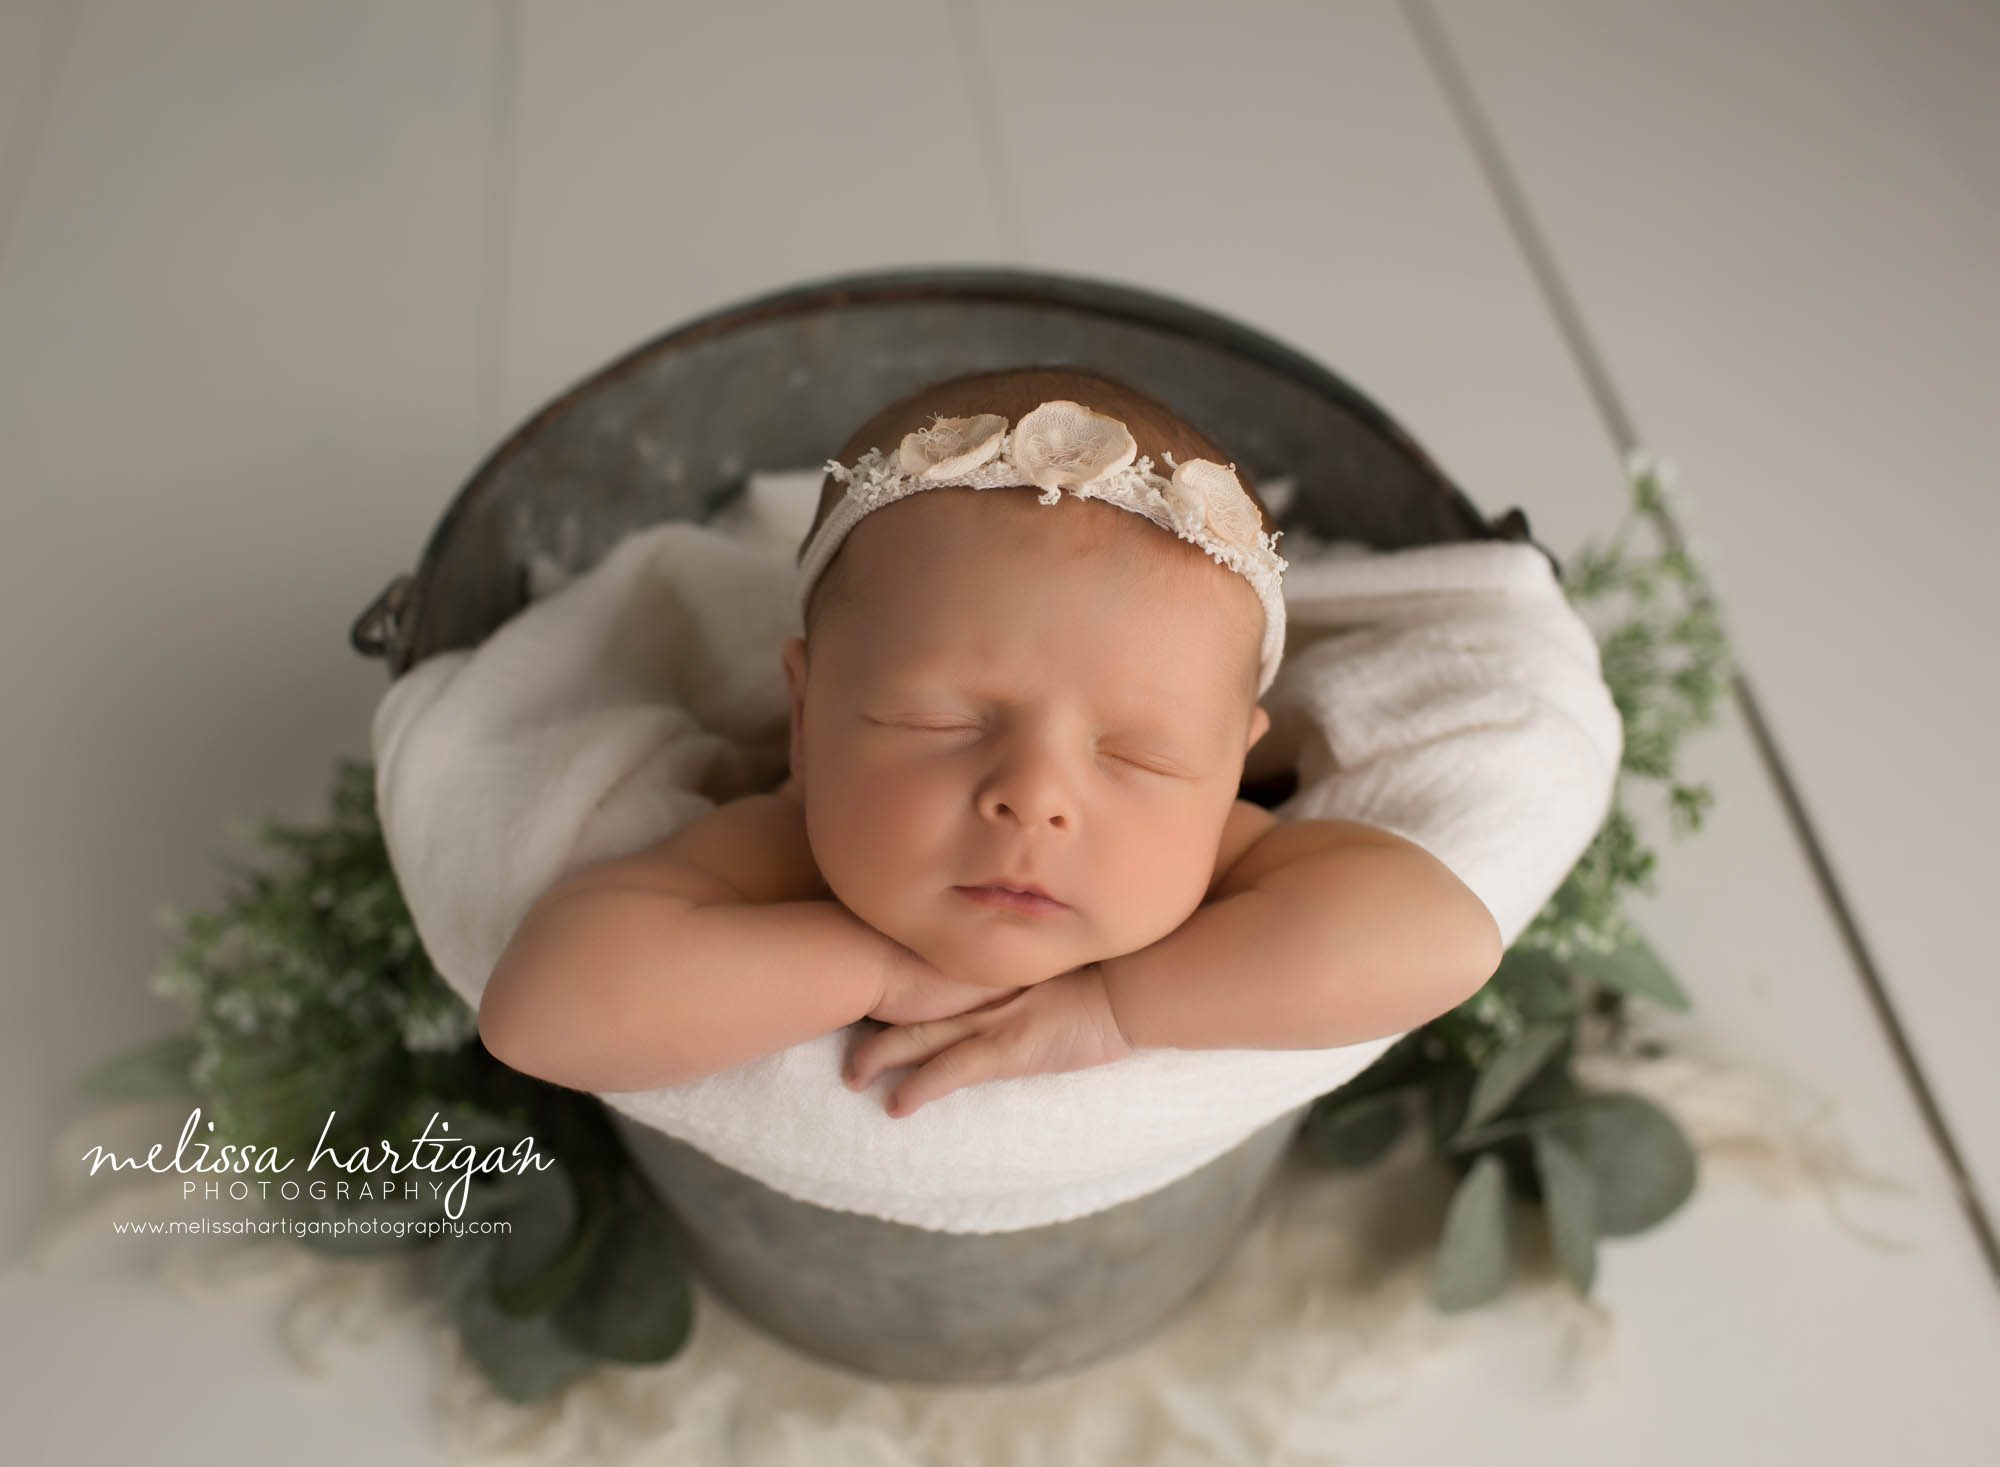 newborn baby girl posed in metal bucket with white wrap and floral headband